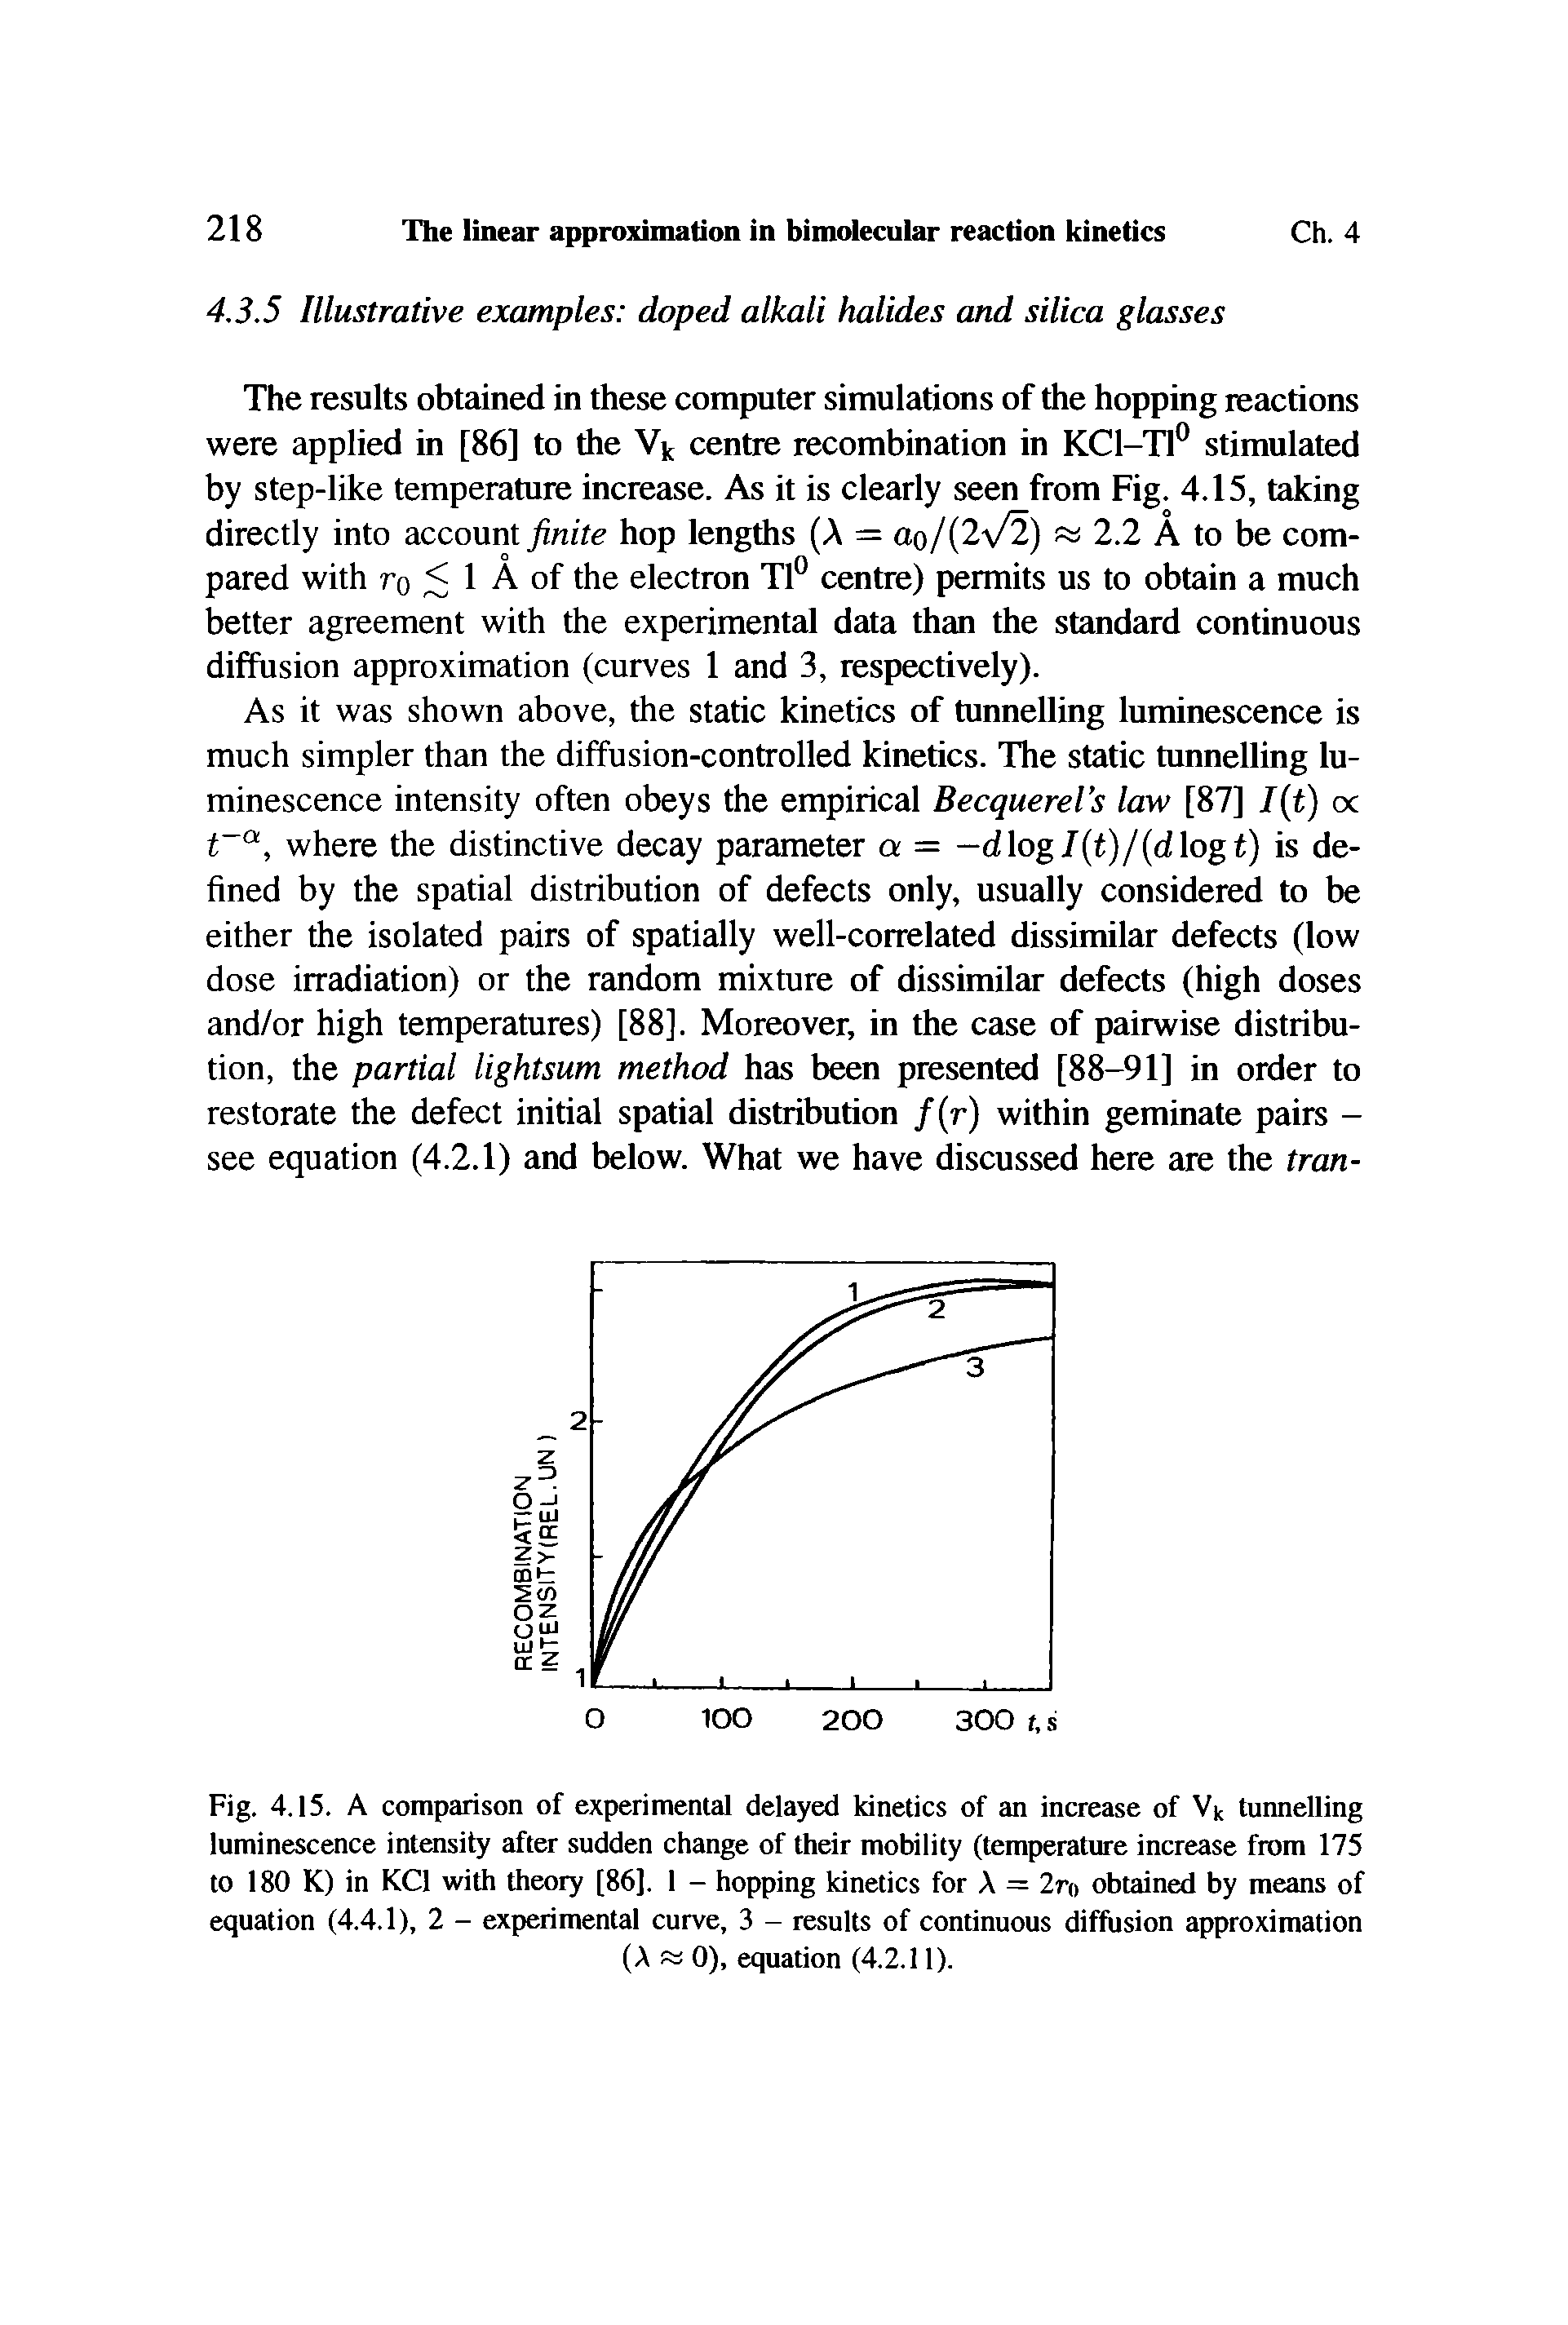 Fig. 4.15. A comparison of experimental delayed kinetics of an increase of tunnelling luminescence intensity after sudden change of their mobility (temperature increase from 175 to 180 K) in KC1 with theory [86], 1 - hopping kinetics for A = 2n> obtained by means of equation (4.4.1), 2 - experimental curve, 3 - results of continuous diffusion approximation...